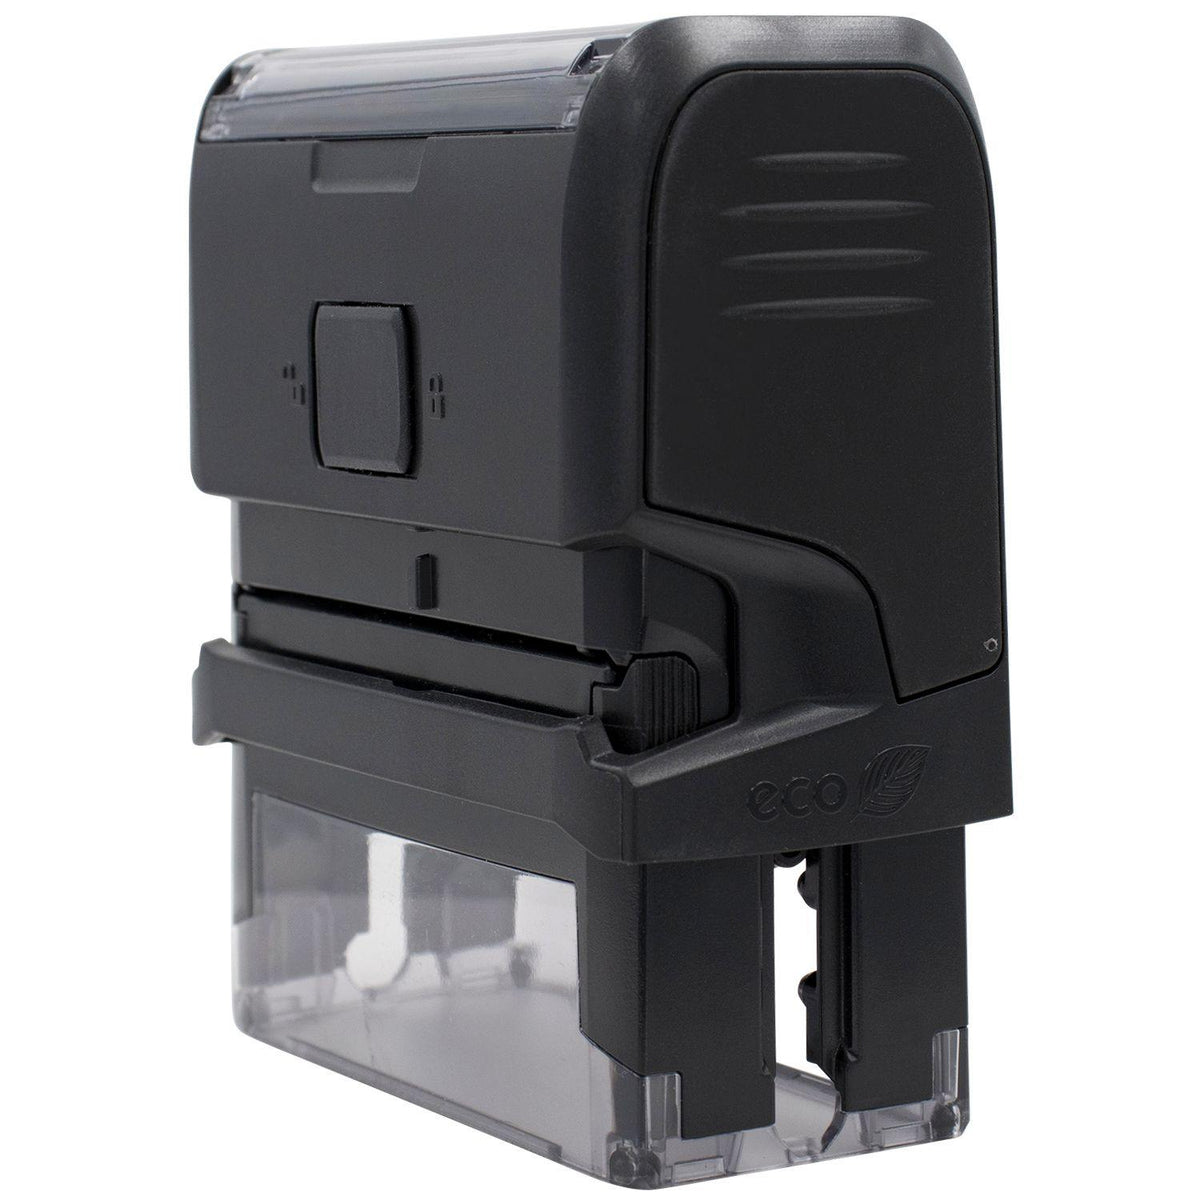 Self Inking First Class Mailing Stamp - Engineer Seal Stamps - Brand_Trodat, Impression Size_Small, Stamp Type_Self-Inking Stamp, Type of Use_Postal &amp; Mailing, Type of Use_Shipping &amp; Receiving